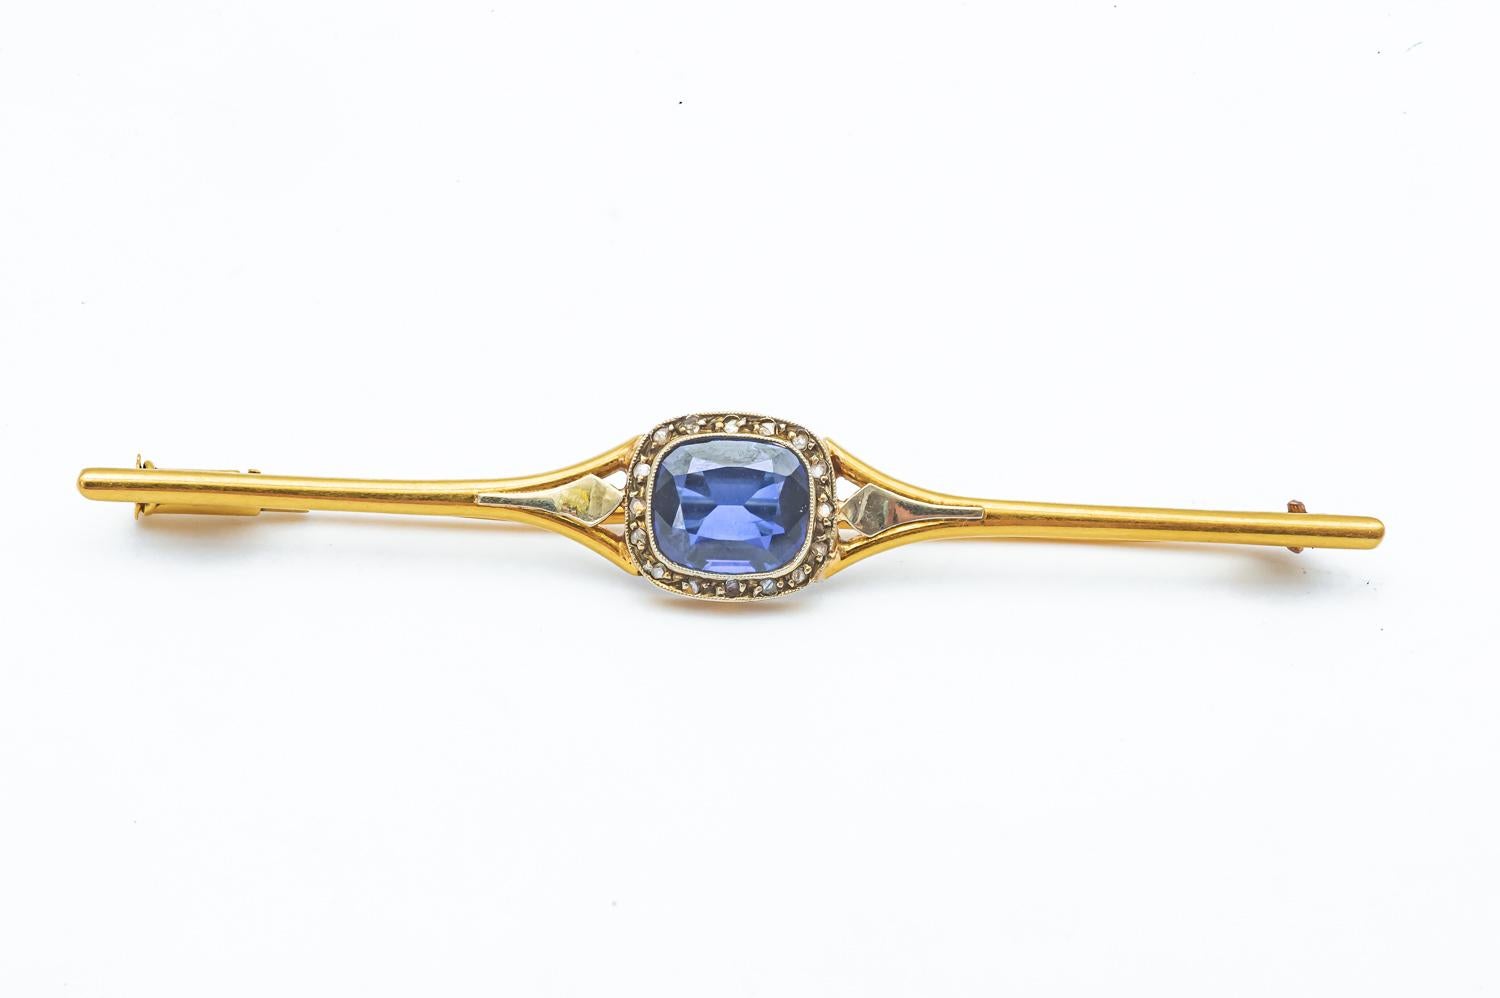 Artisan 18K Yellow and White Gold Brooch with Blue Sapphire and Diamonds